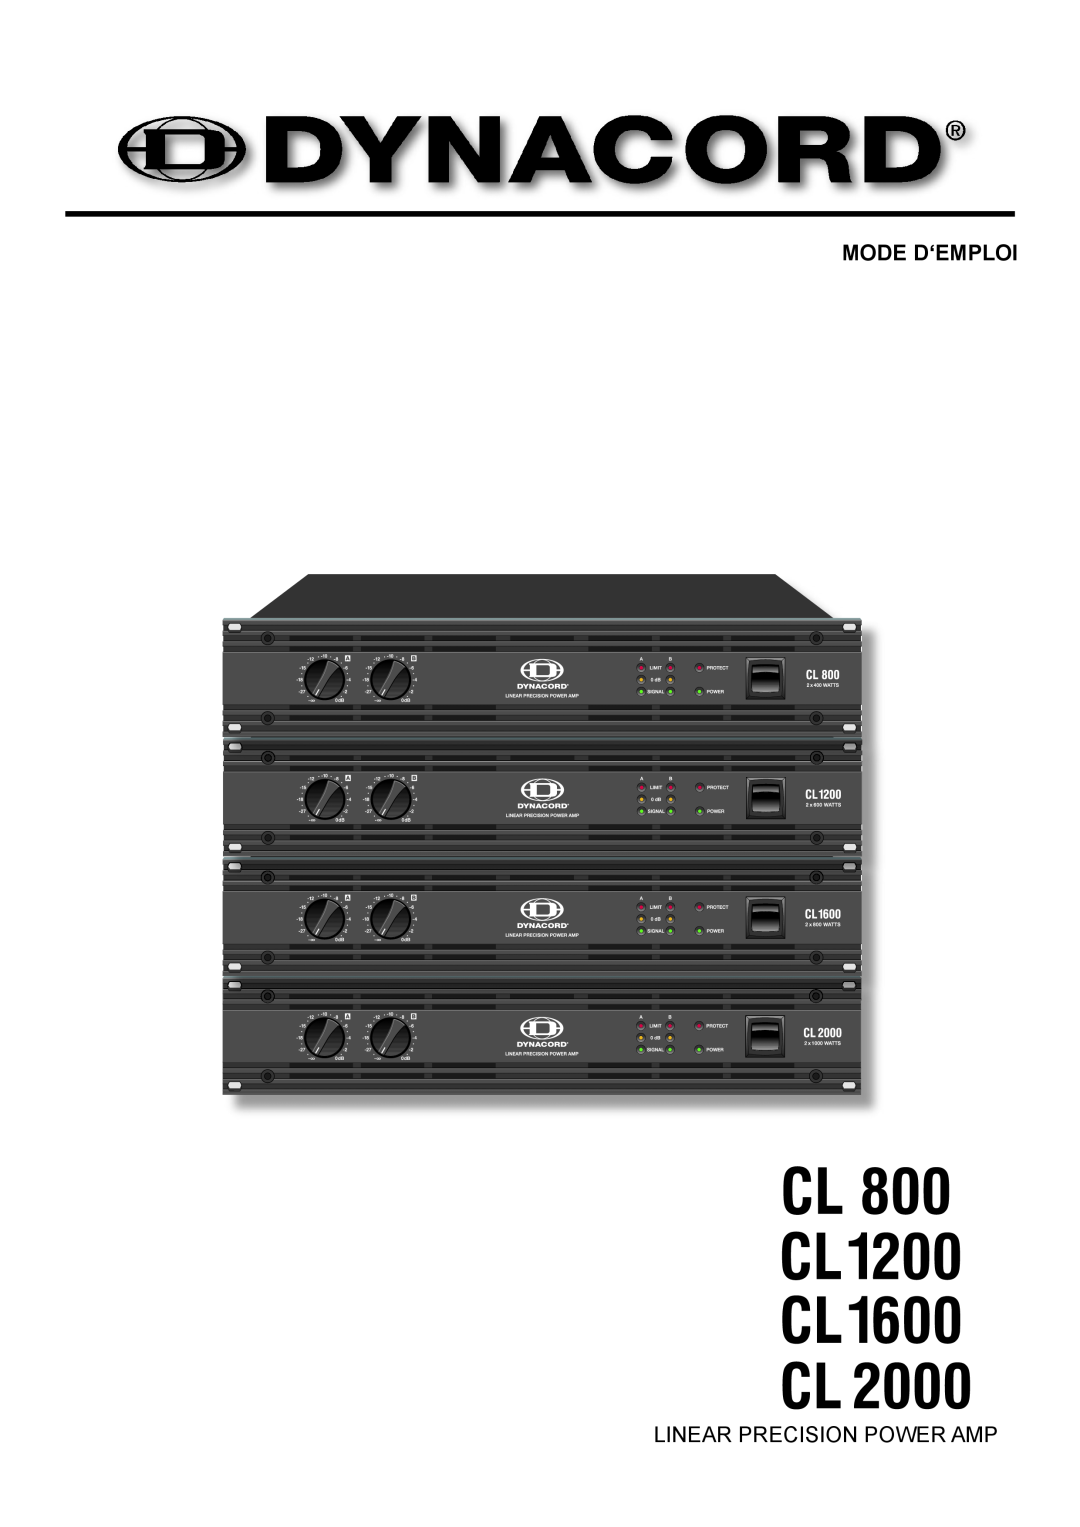 Dynacord CL 800 owner manual Mode D‘Emploi, Linear Precision Power Amp 